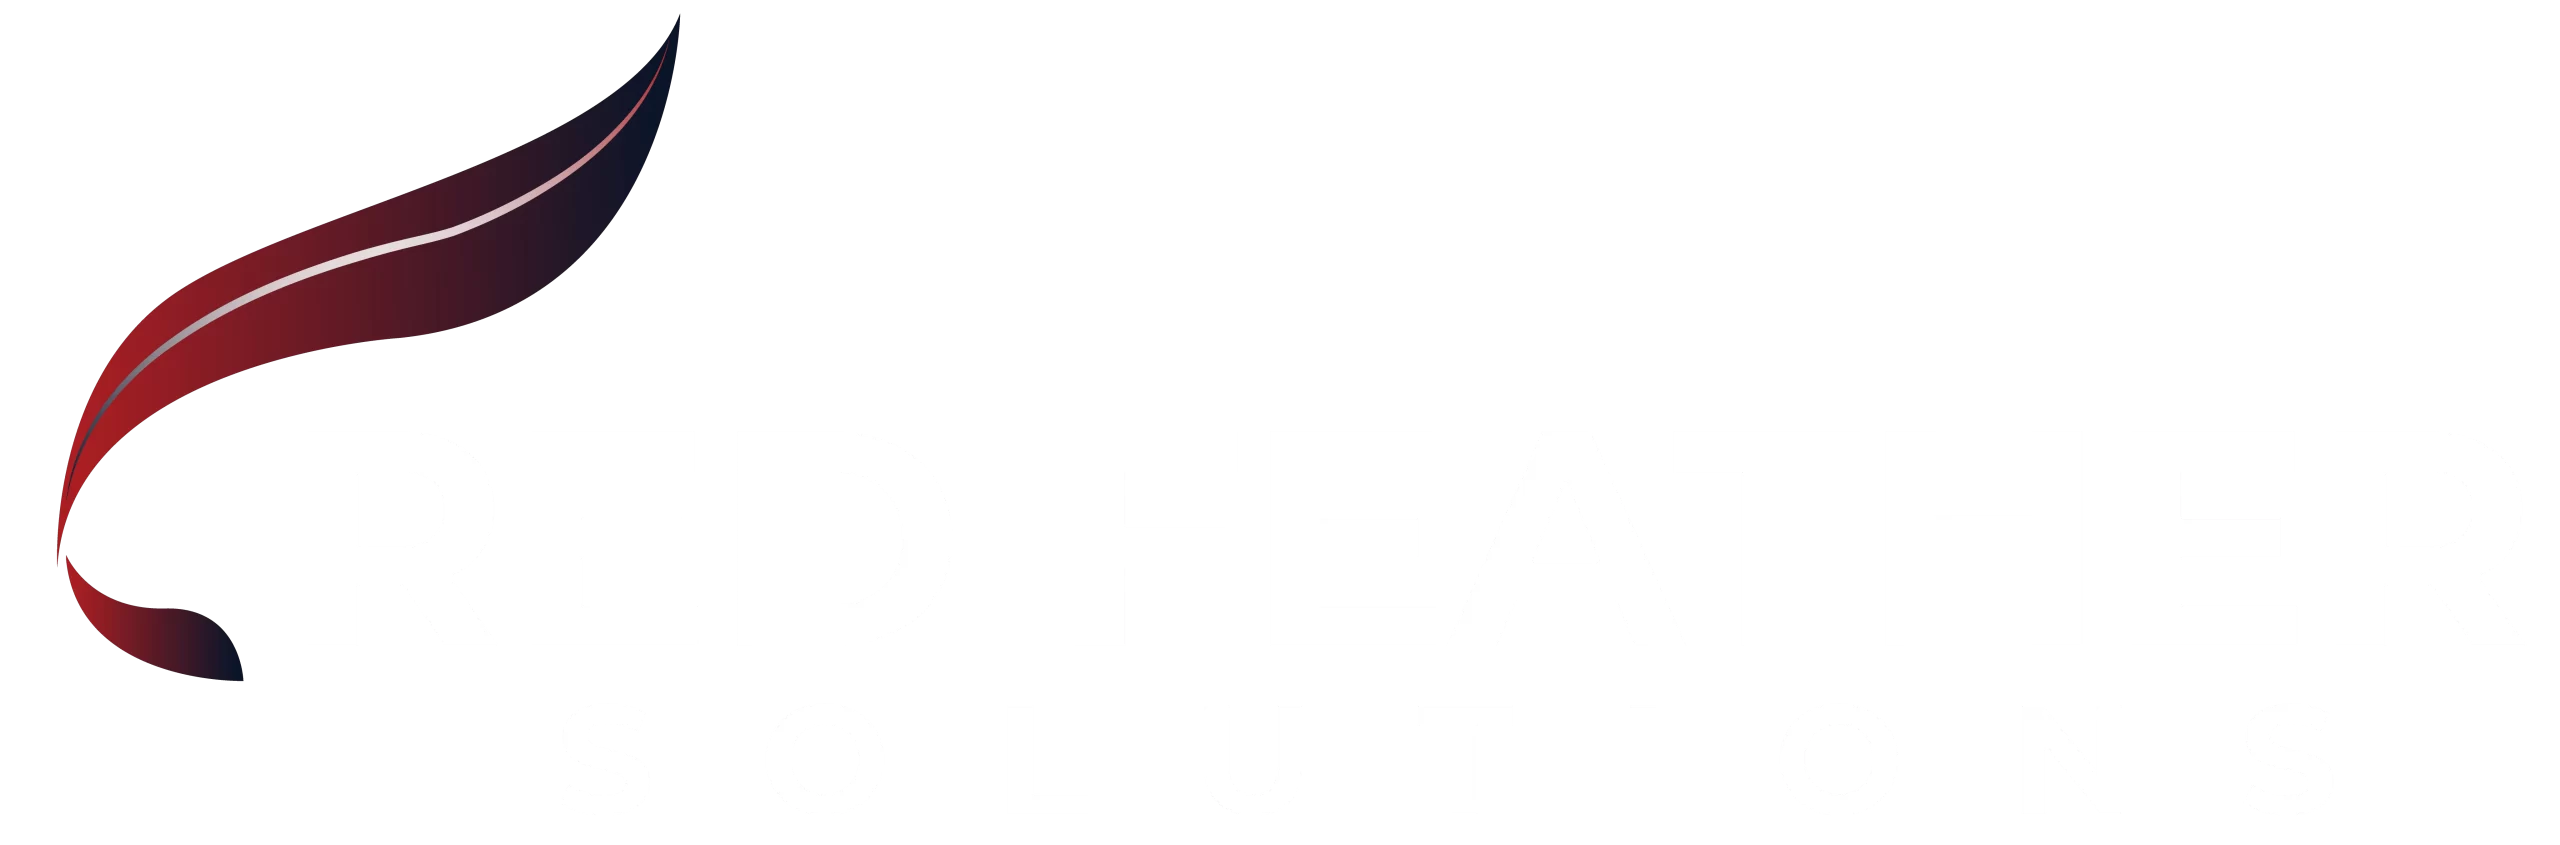 Red Feather Solution Logo